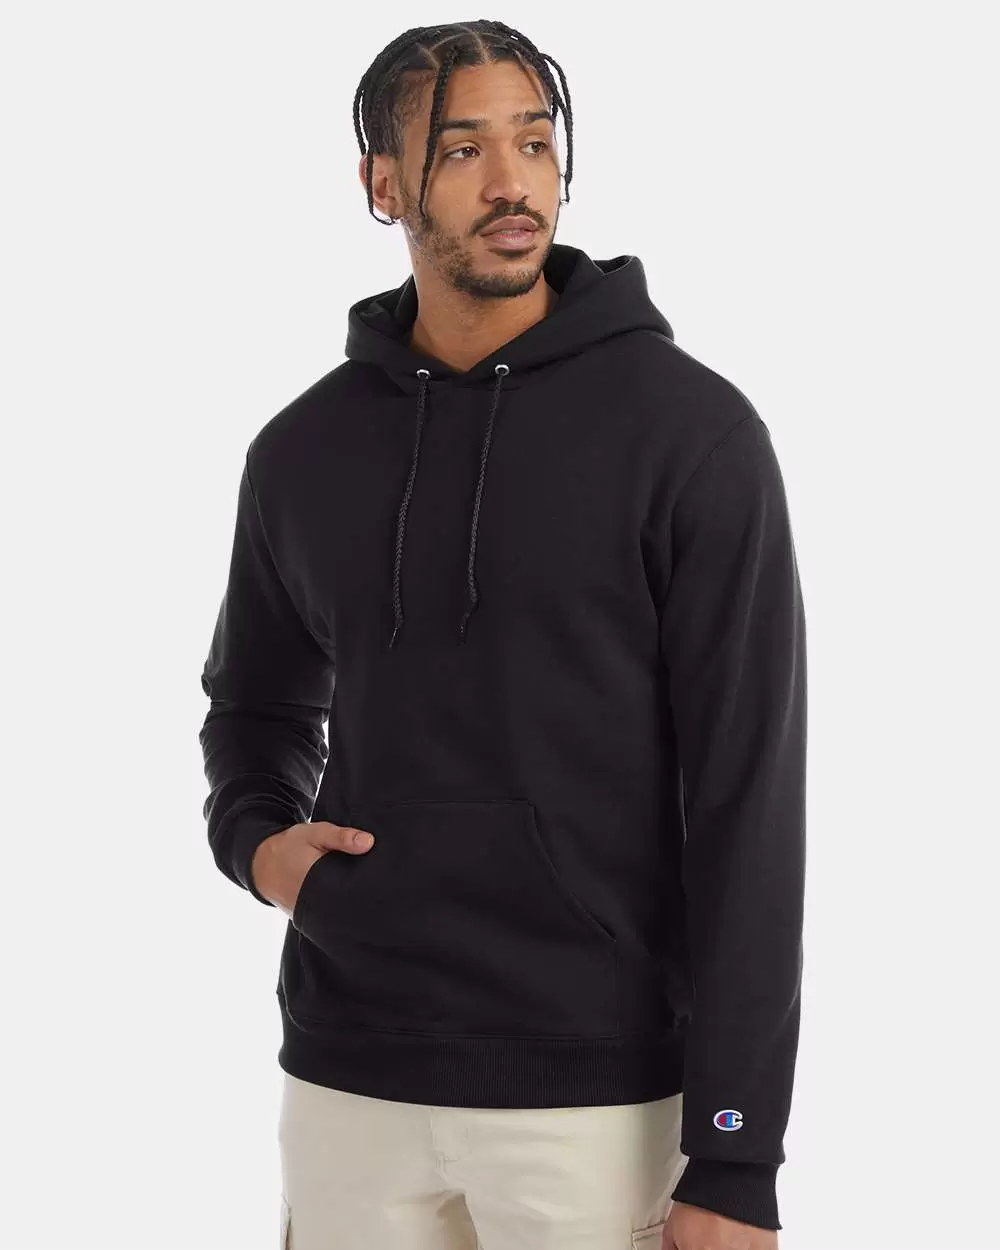 S700 Logo Hoodie - From $12.98